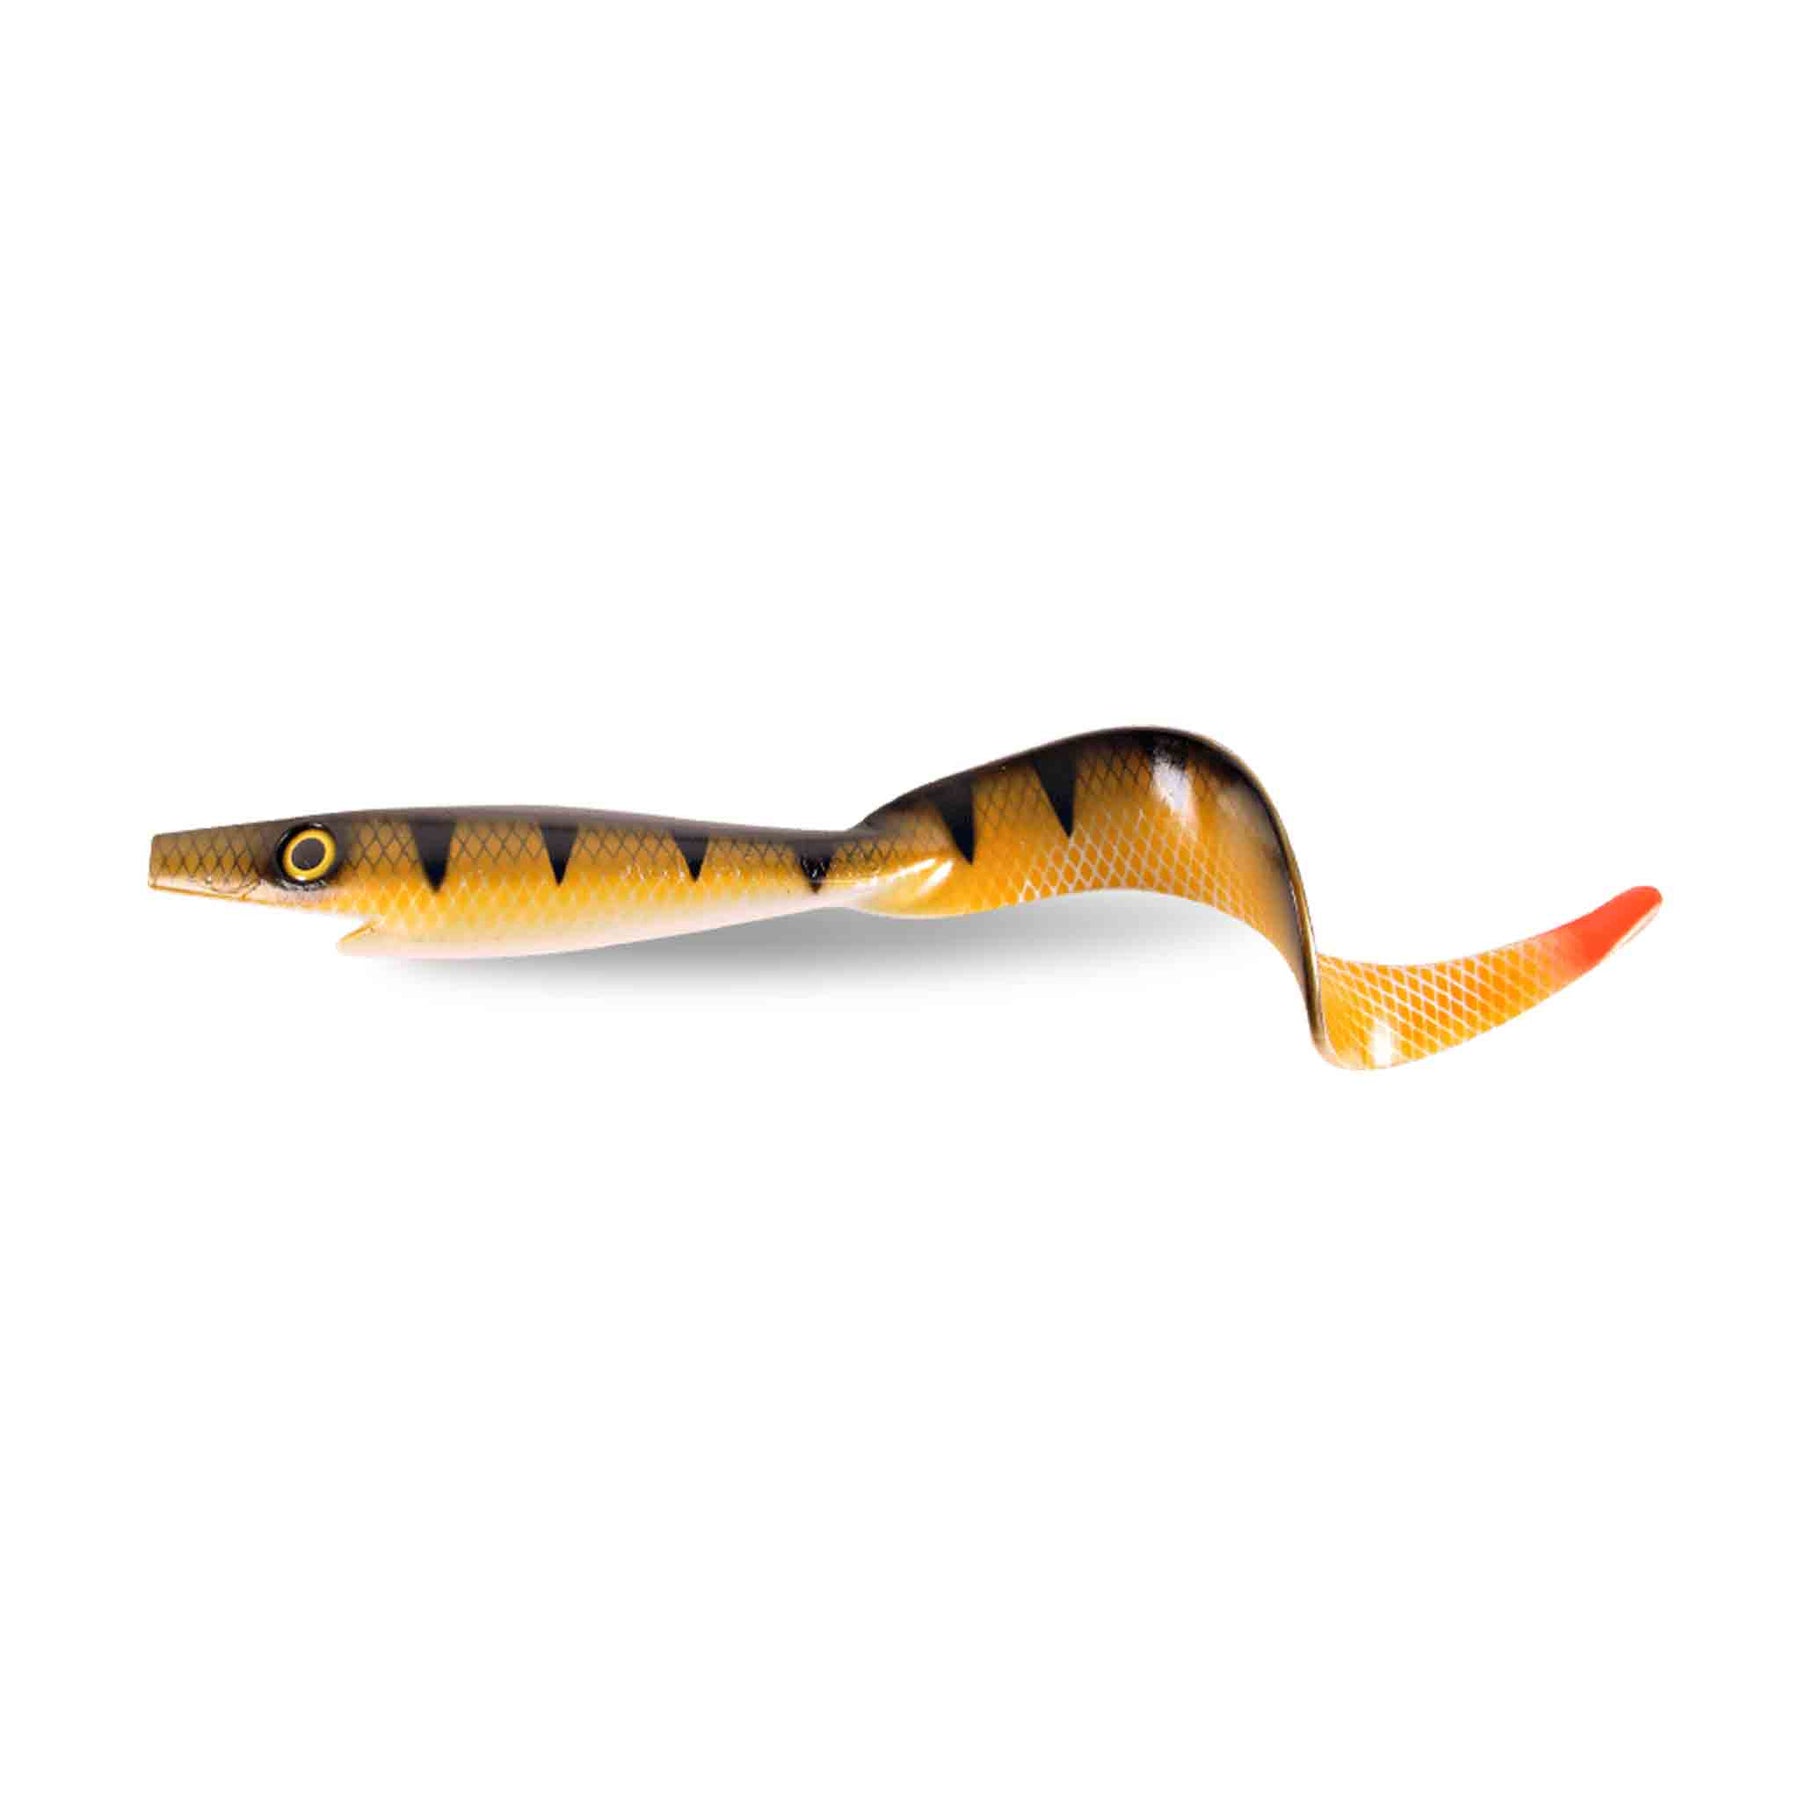 Strike Pro Giant Pig Tail Swimbait | Pike & Musky lures Natural Perch OB